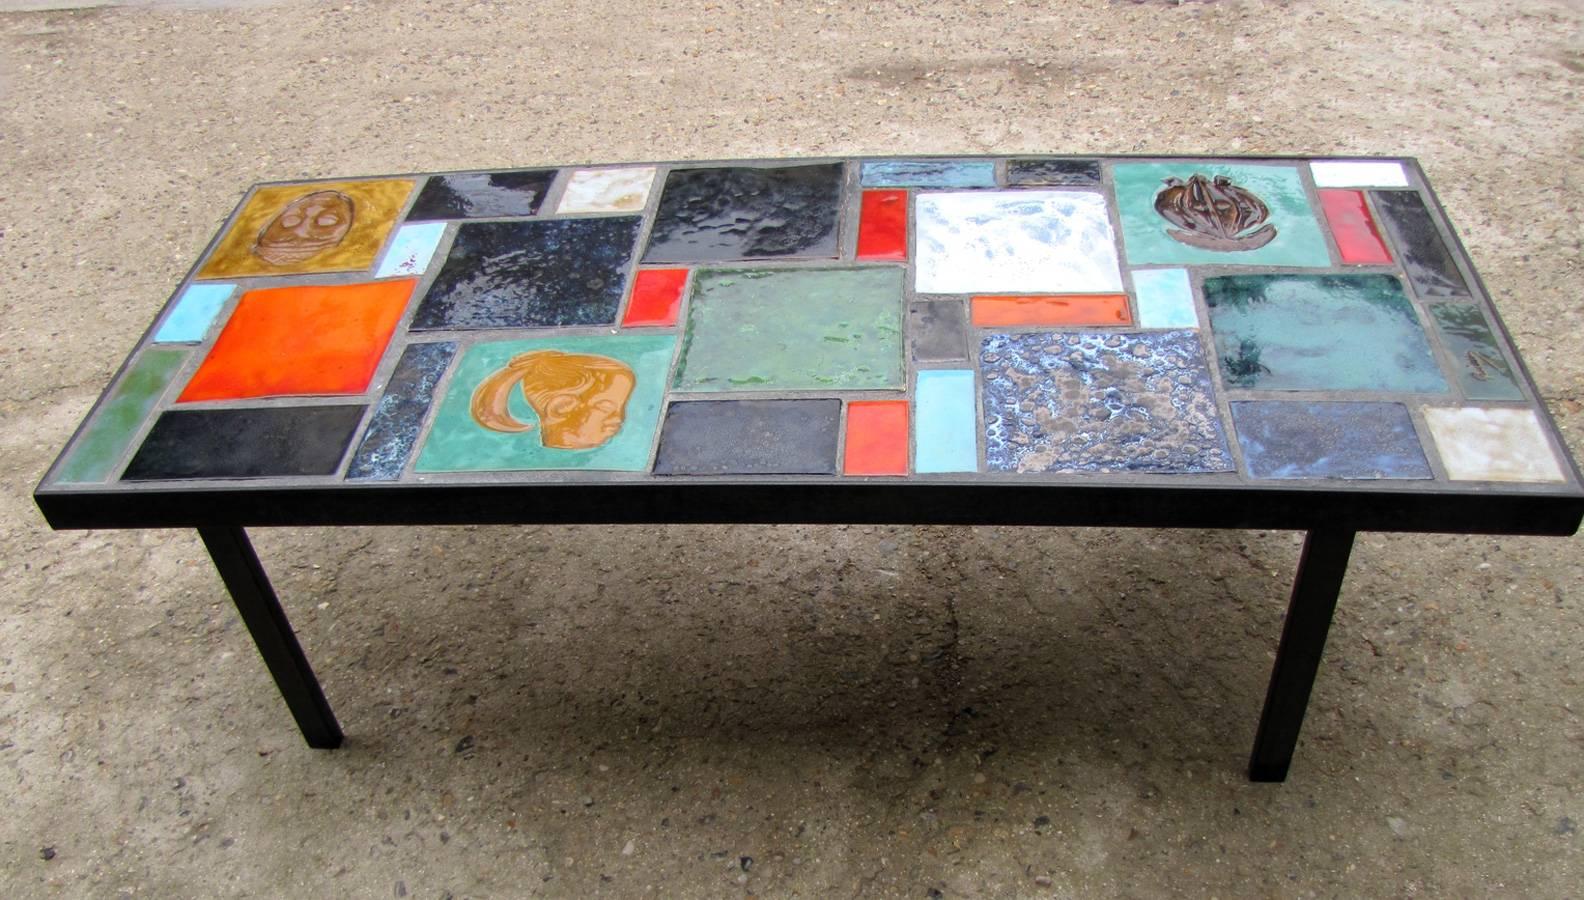 Coffee table with ceramic tiles plateau, Africanist decor. 
A tile is signed 